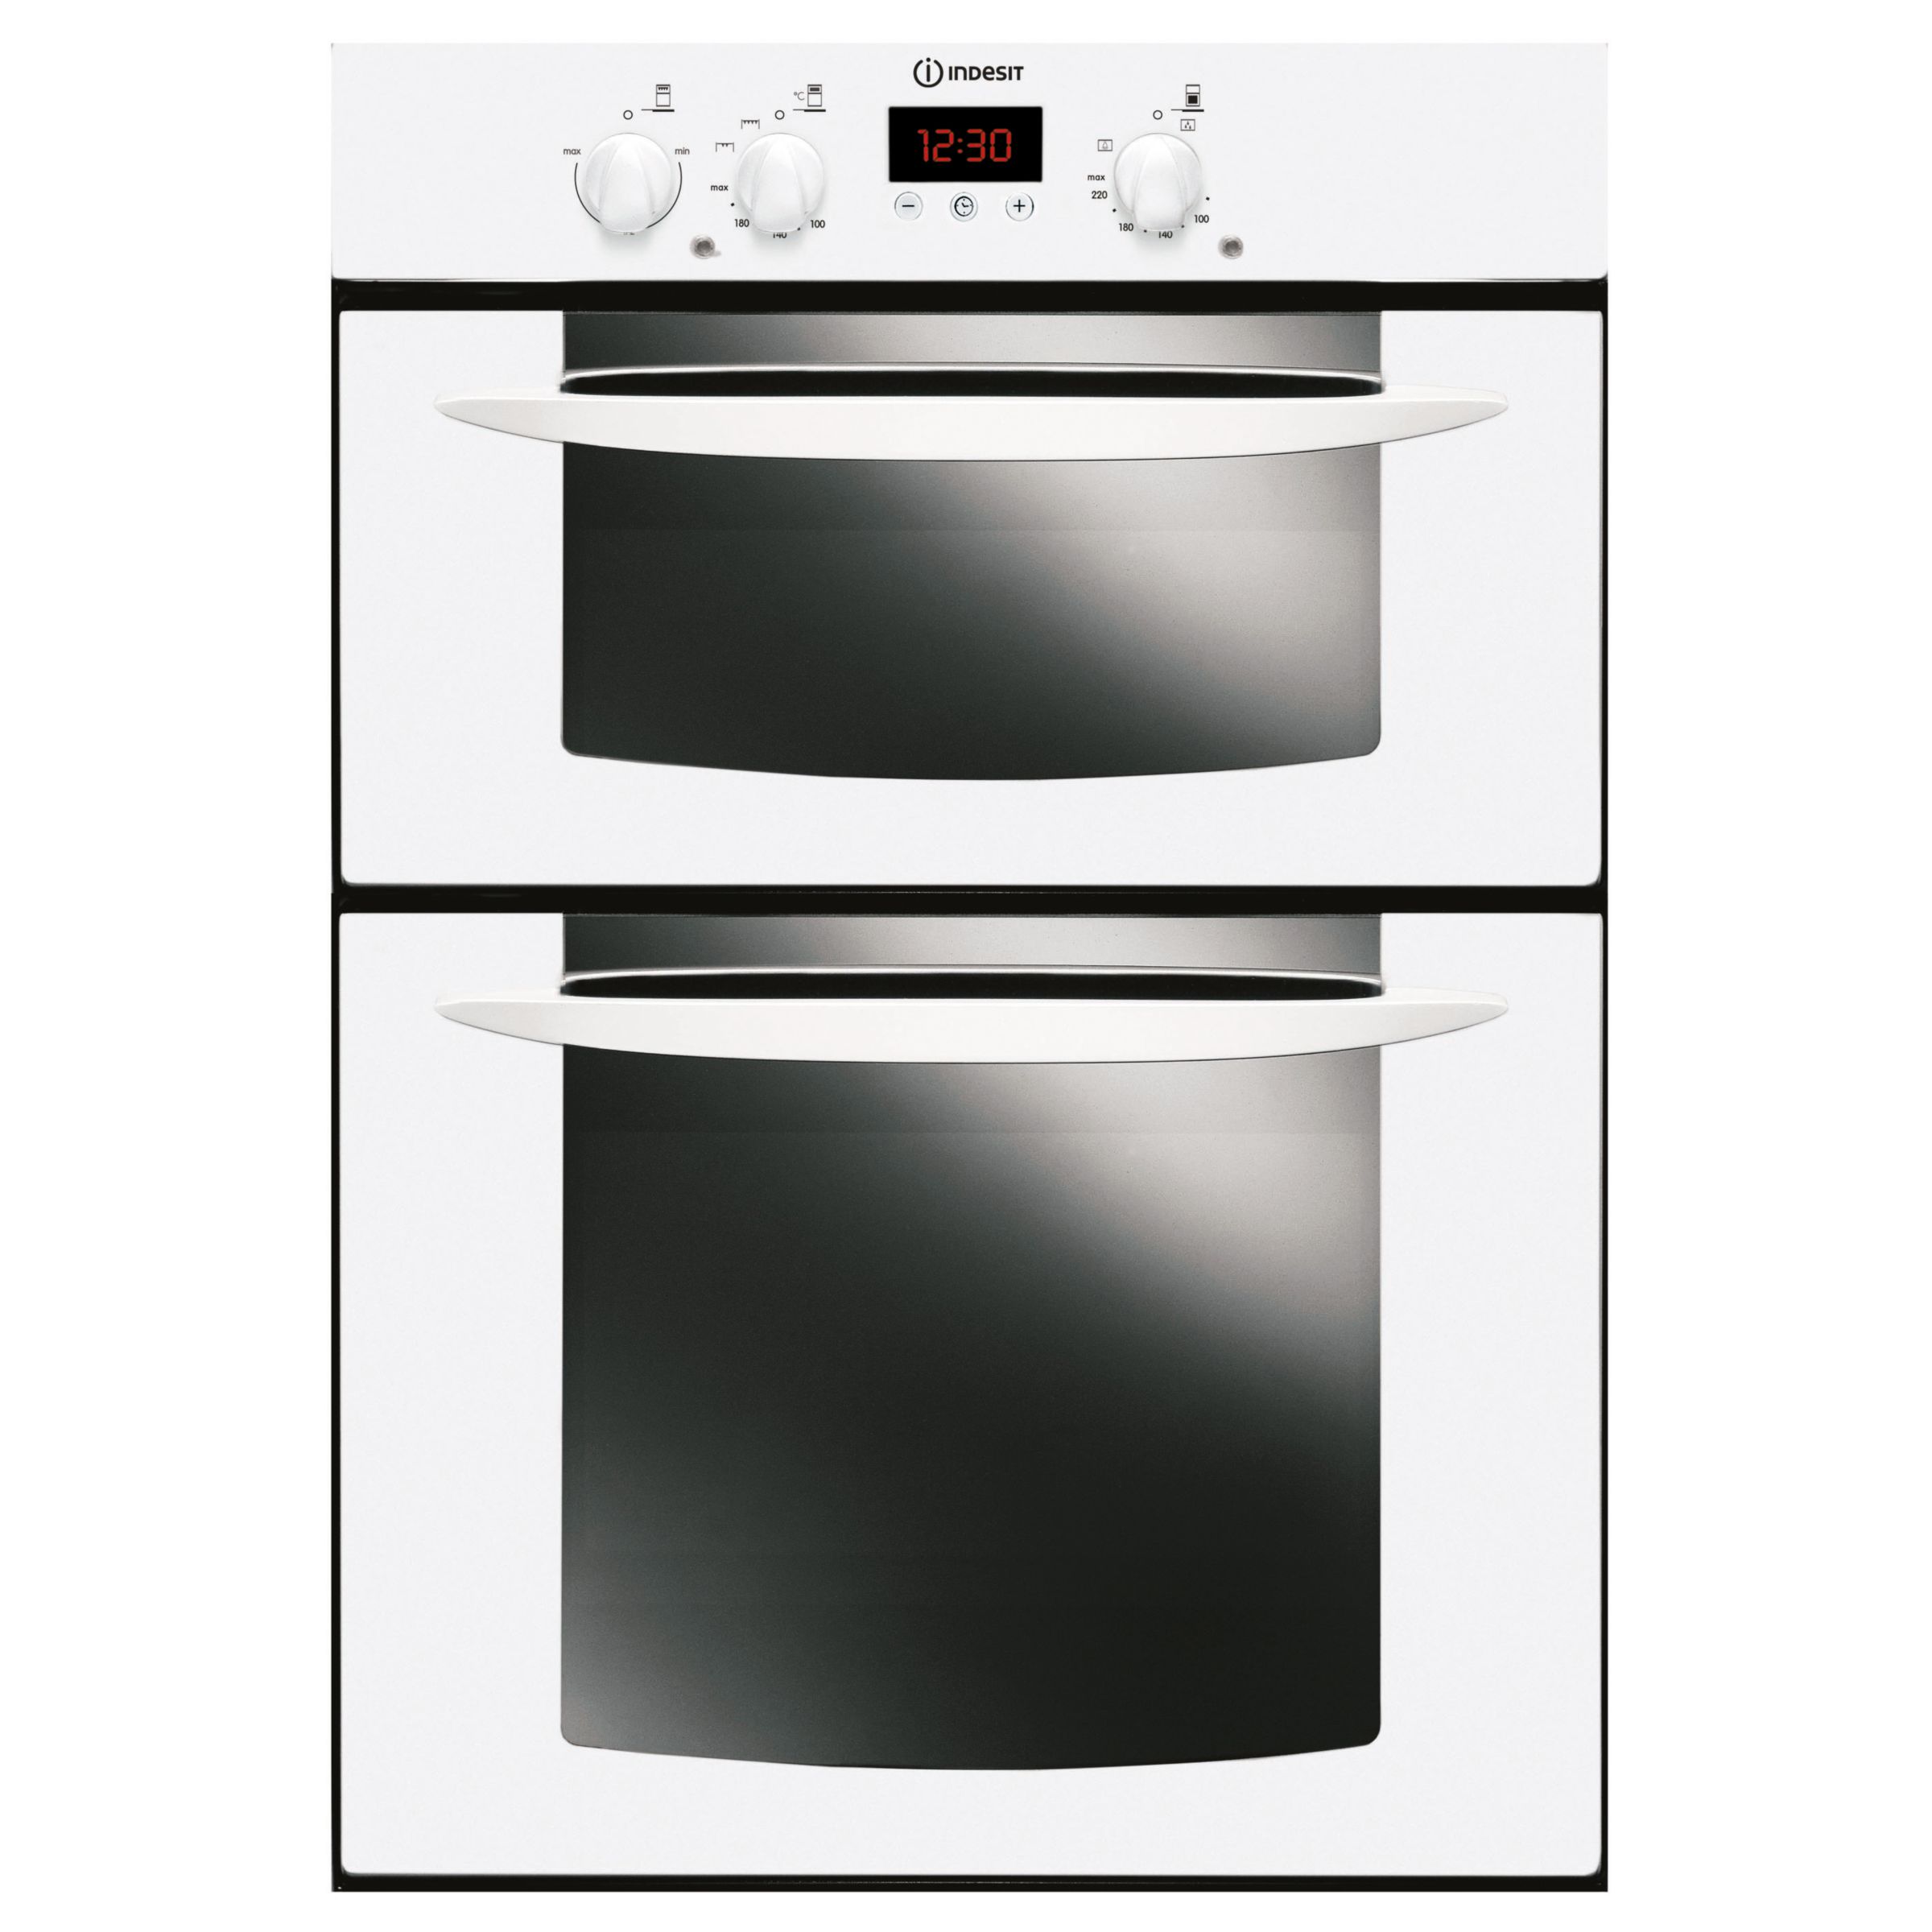 Indesit FID20WH Double Electric Oven, White at John Lewis